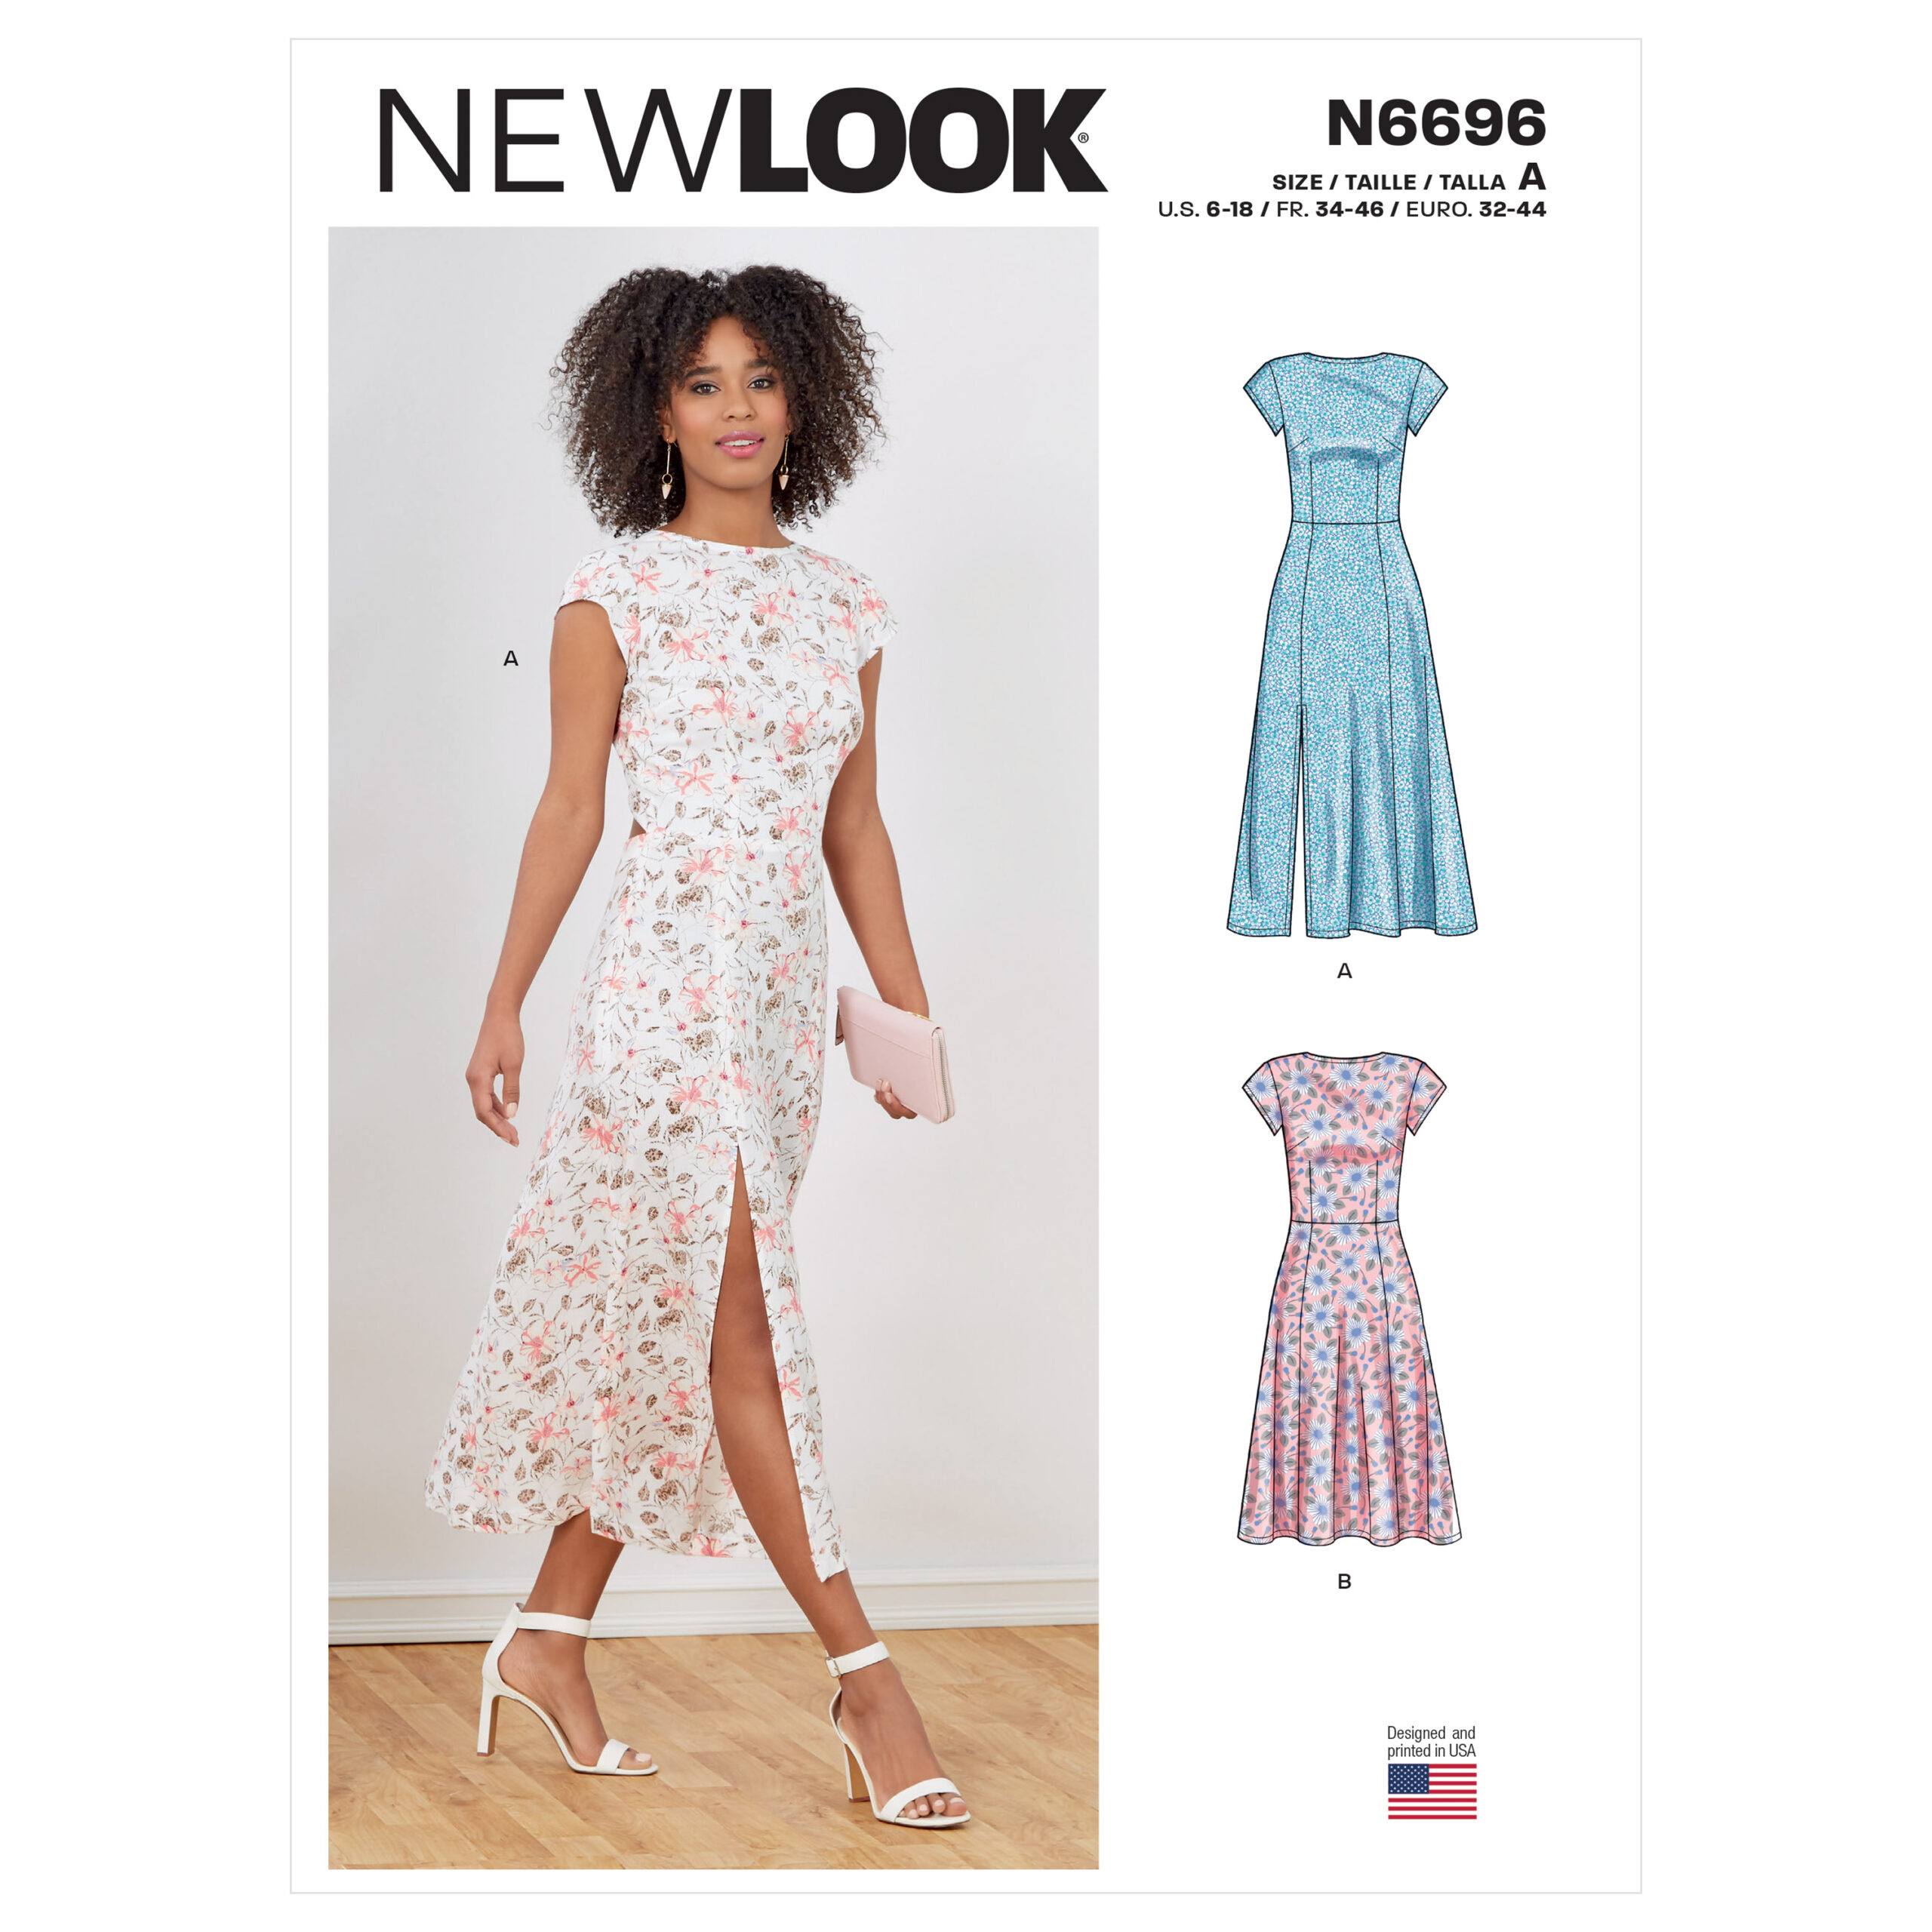 New Look Dresses N6766 - The Fold Line